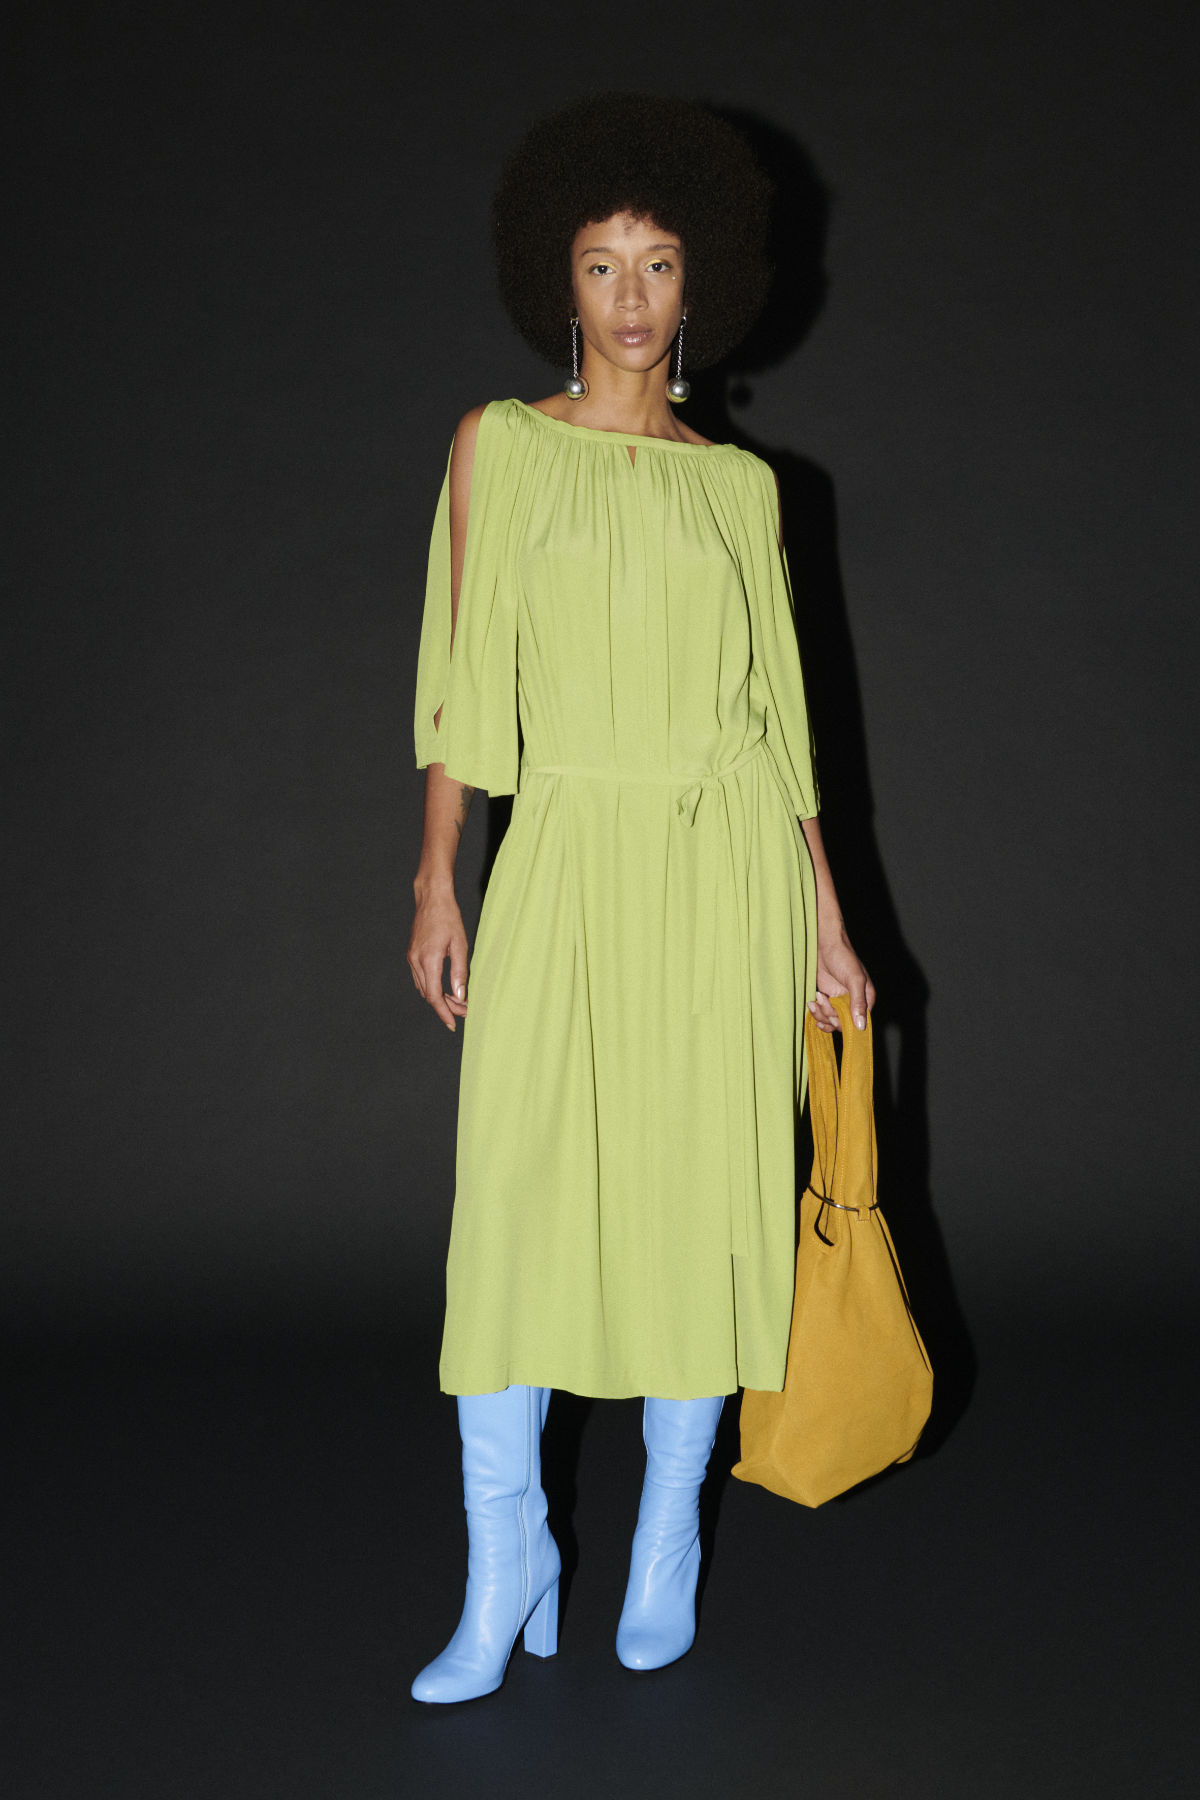 Lutz Huelle Presents Its New Spring Summer 2021 Collection